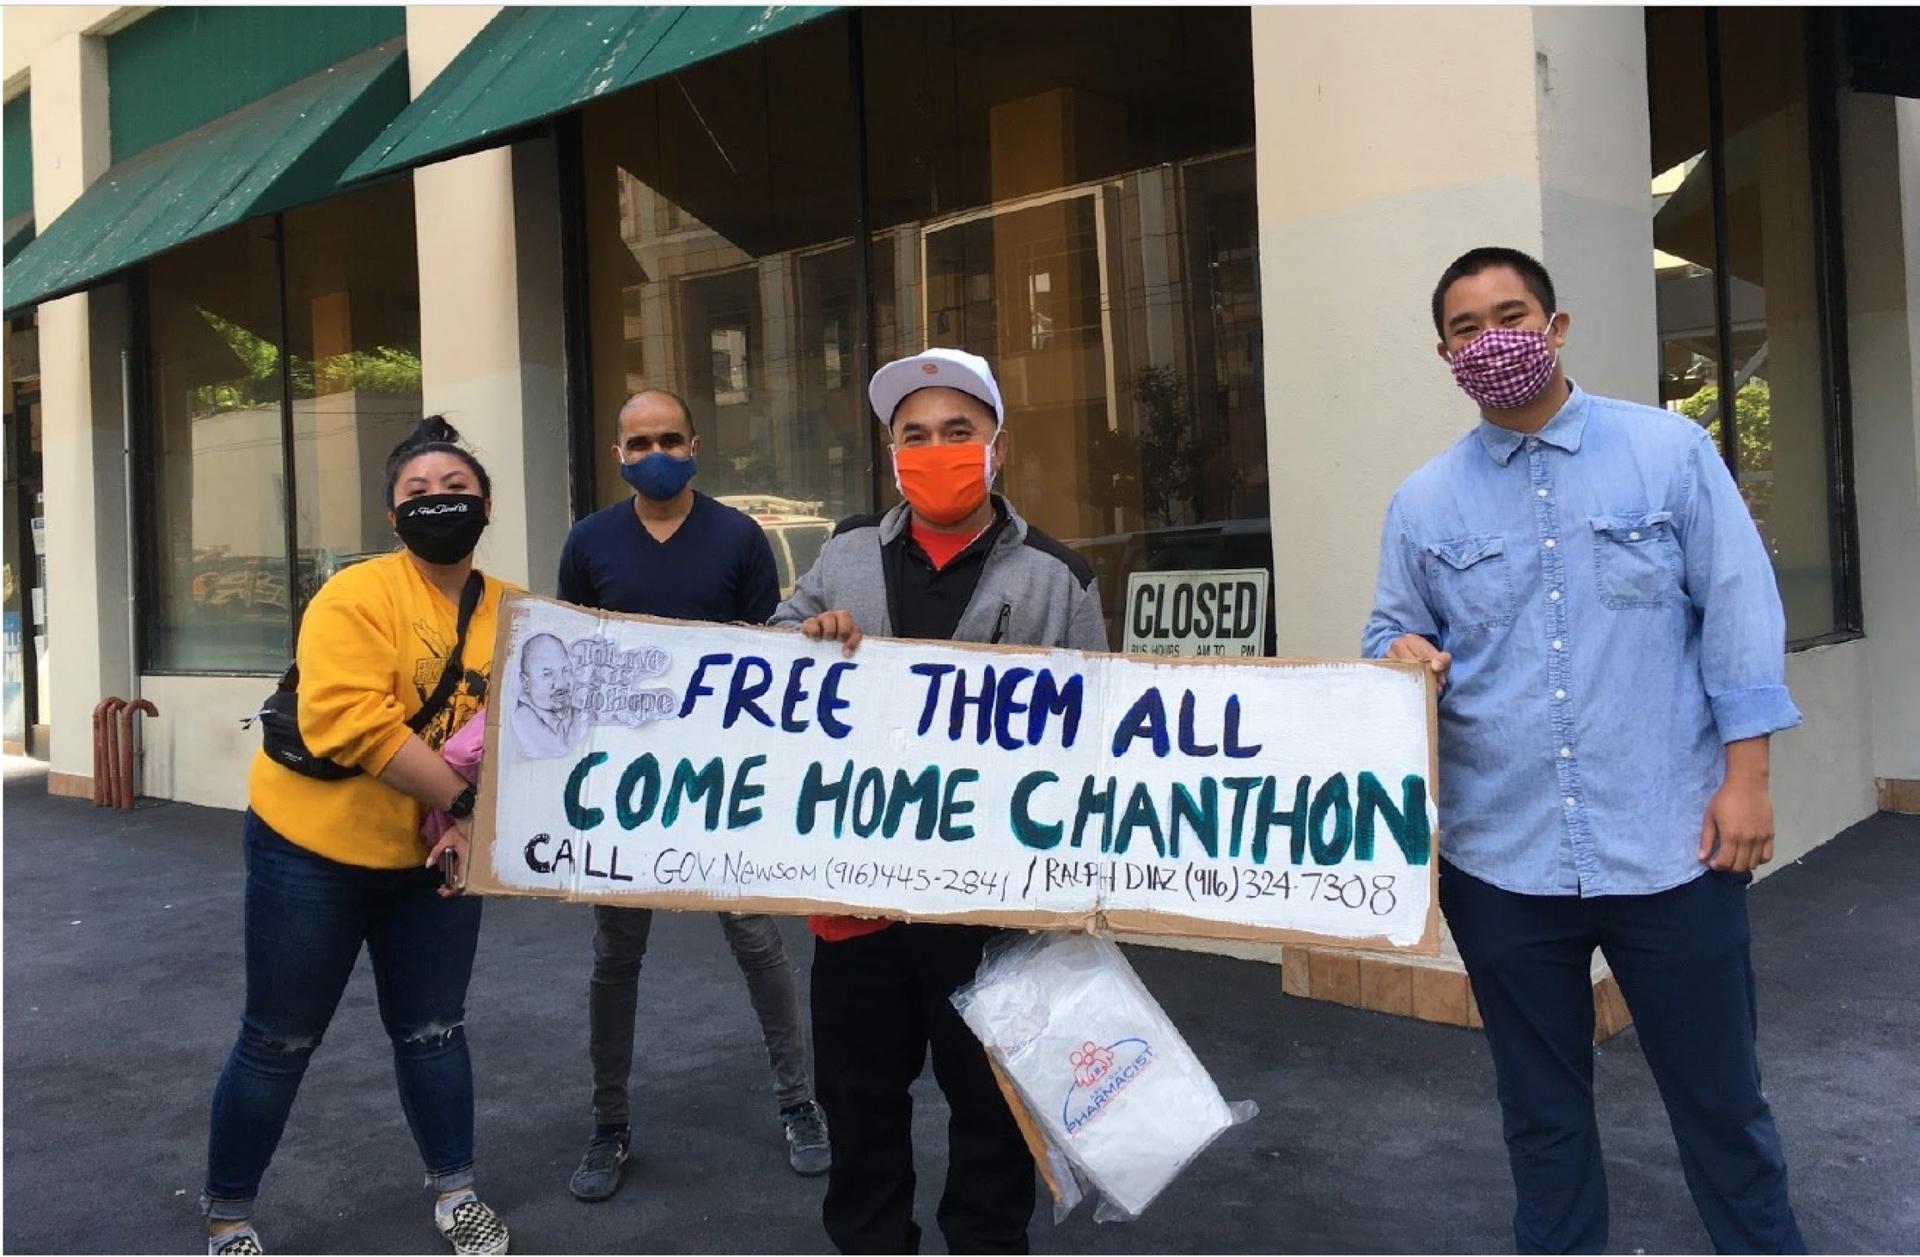  Immigrant rights advocates in San Francisco demanded the release of Chanthon Bun from San Quentin State Prison, along with other inmates showing symptoms of the coronavirus.